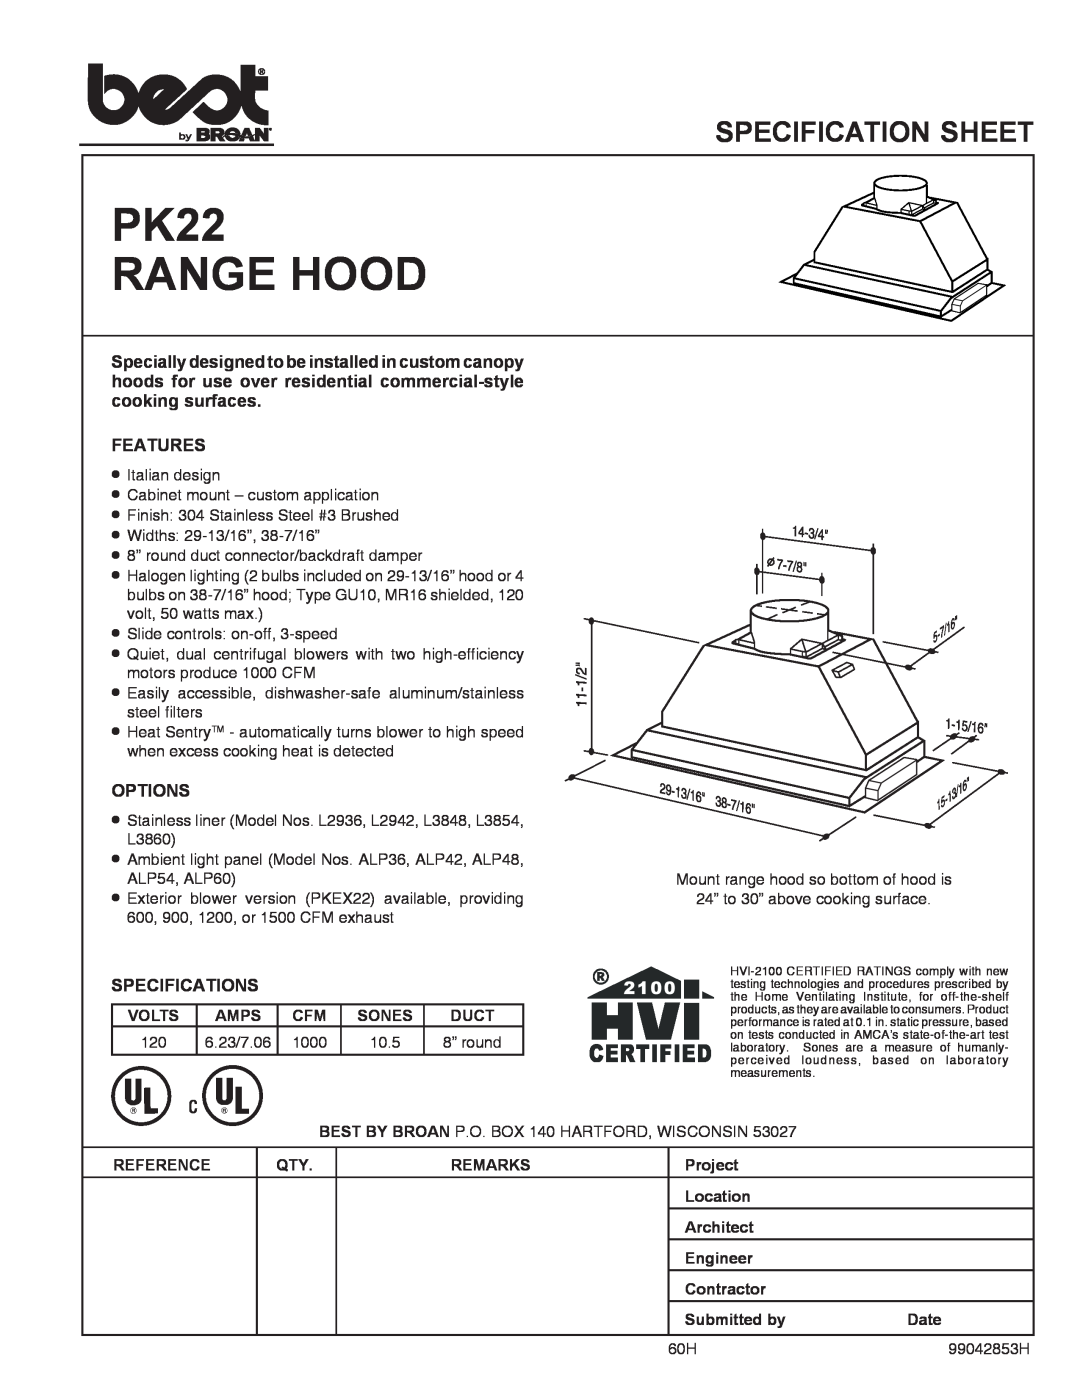 Best specifications PK22 RANGE HOOD, Specification Sheet, Features, Options, Specifications 